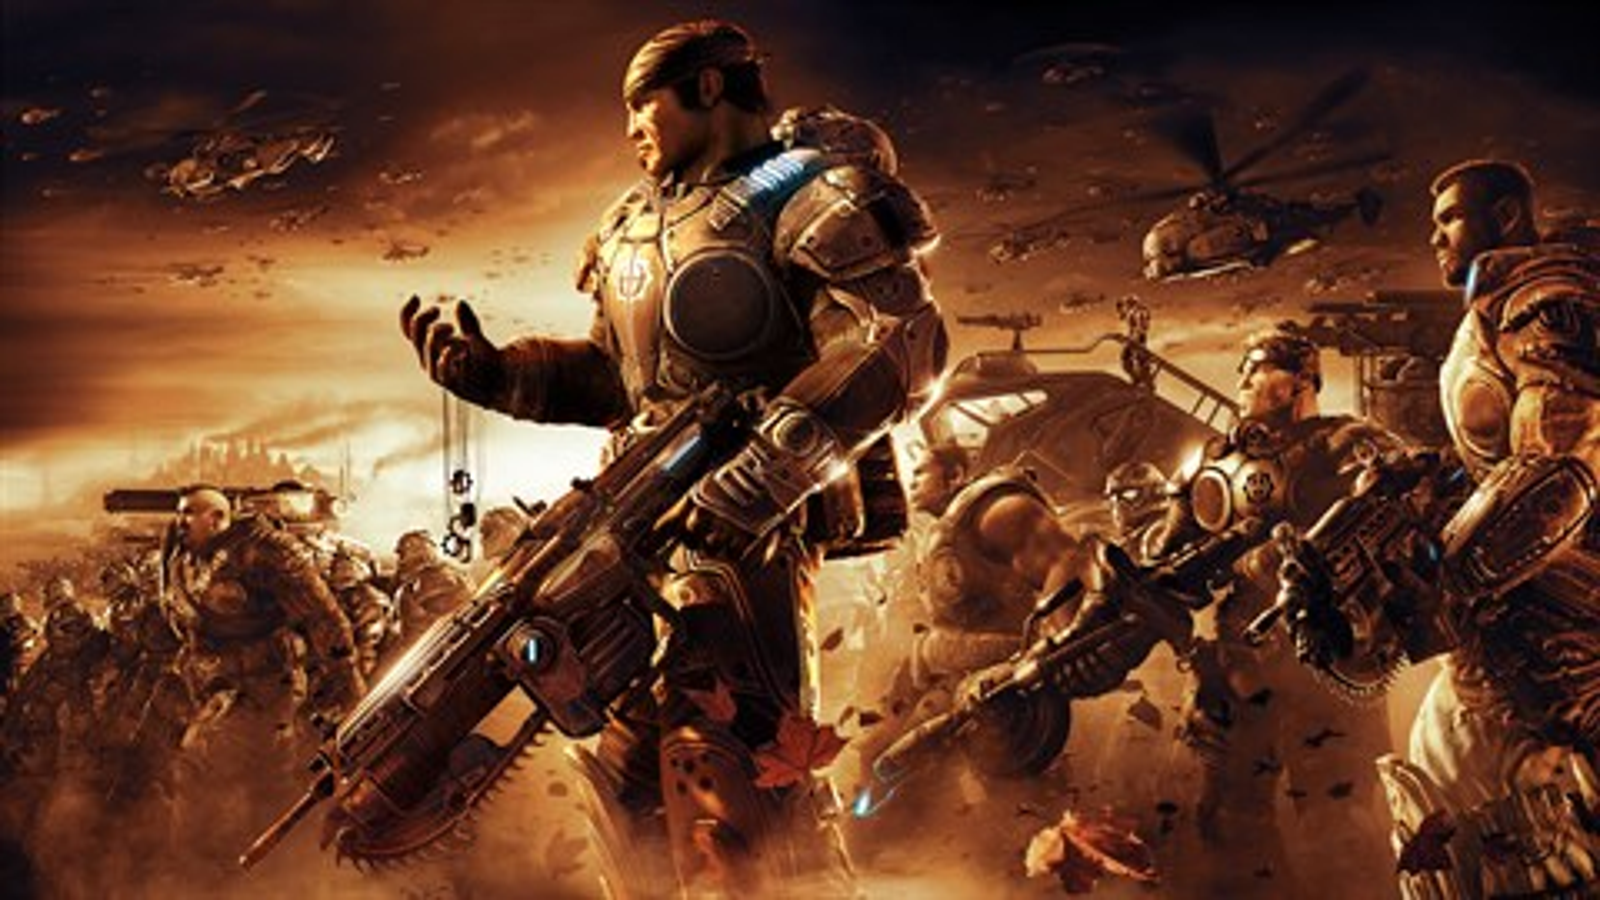 Gears Of War 2 turns 15, is still the peak of the series